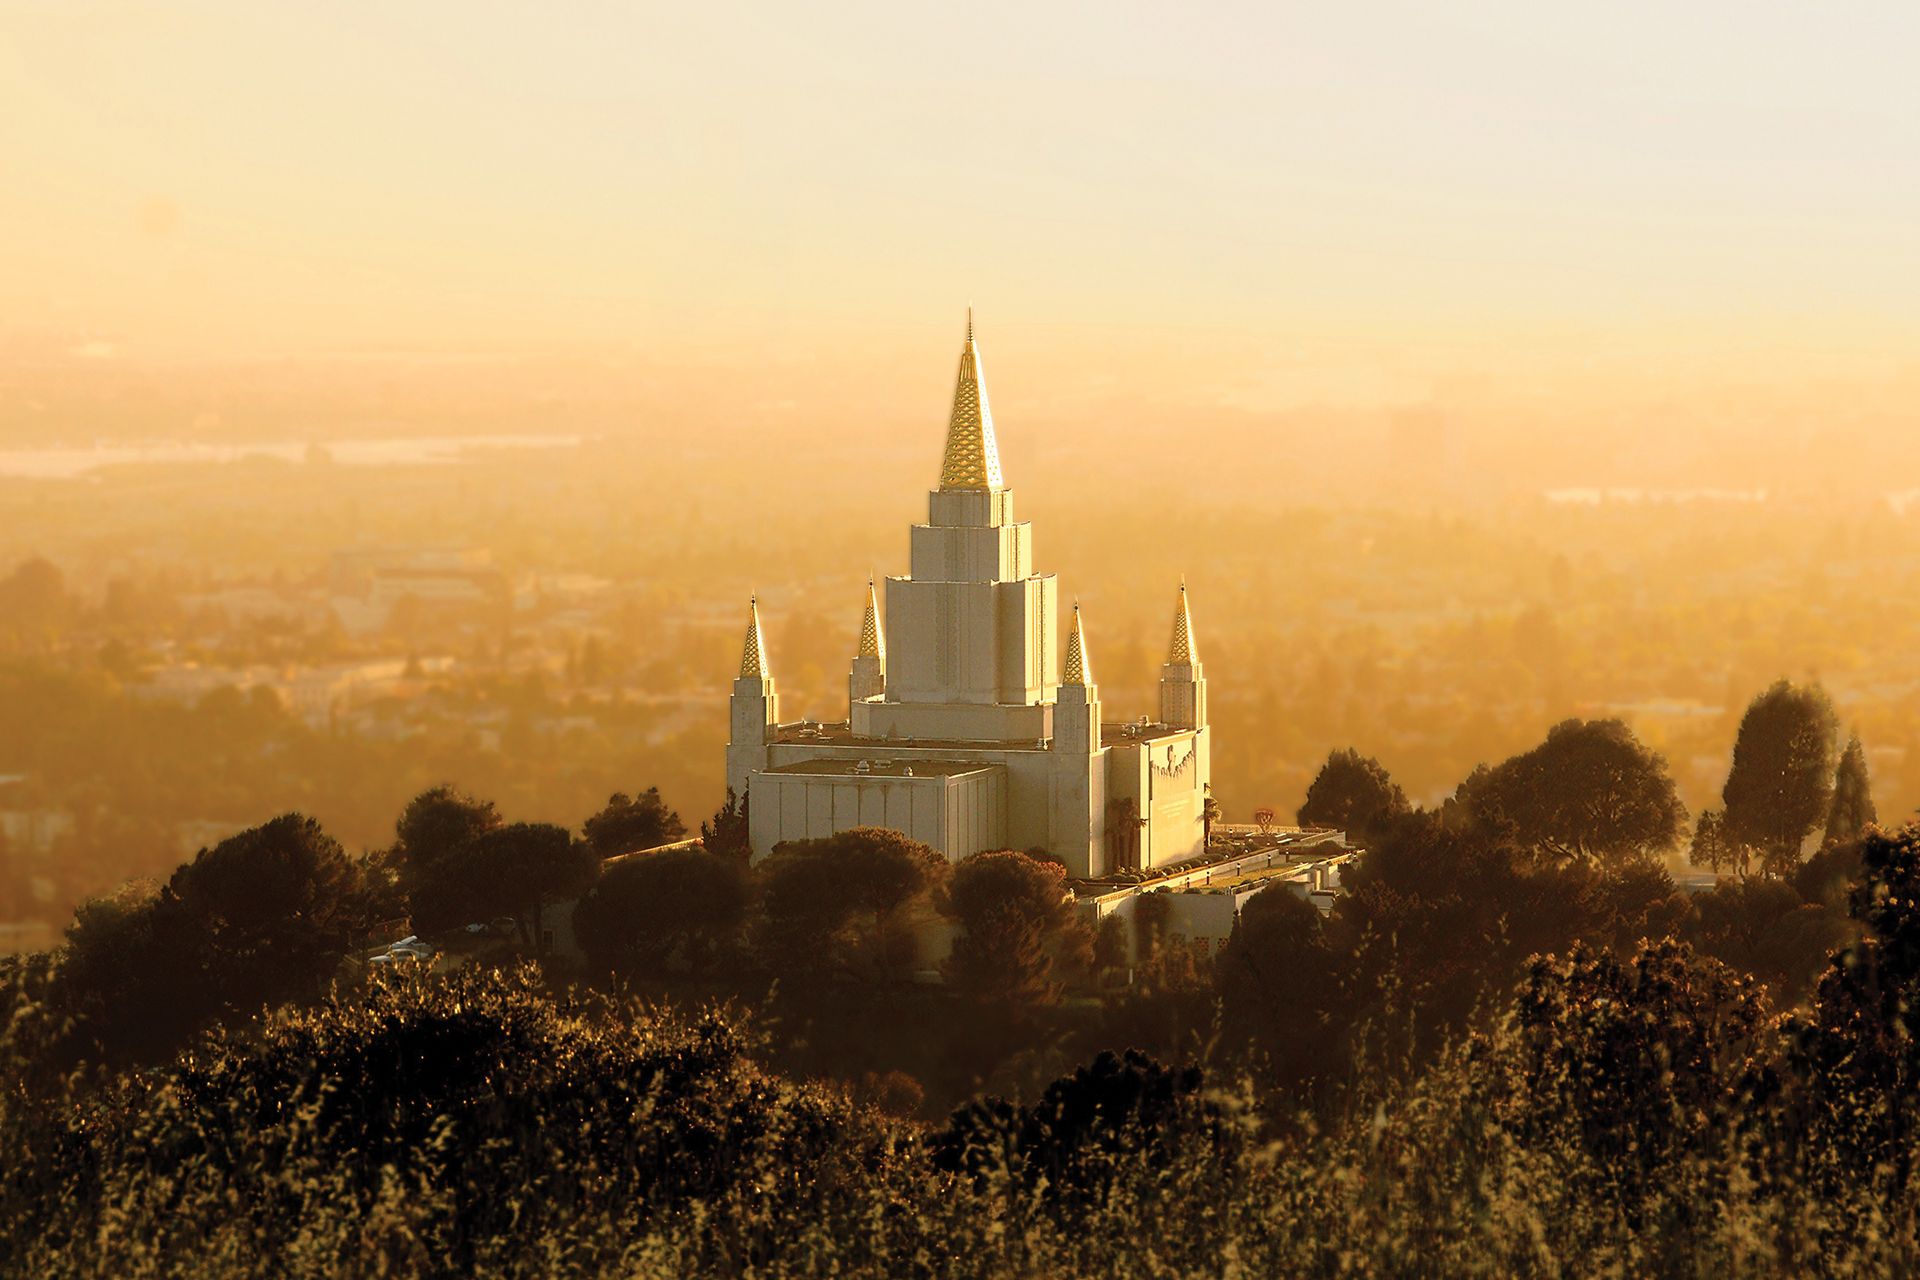 The Oakland California Temple at sunset, including scenery.